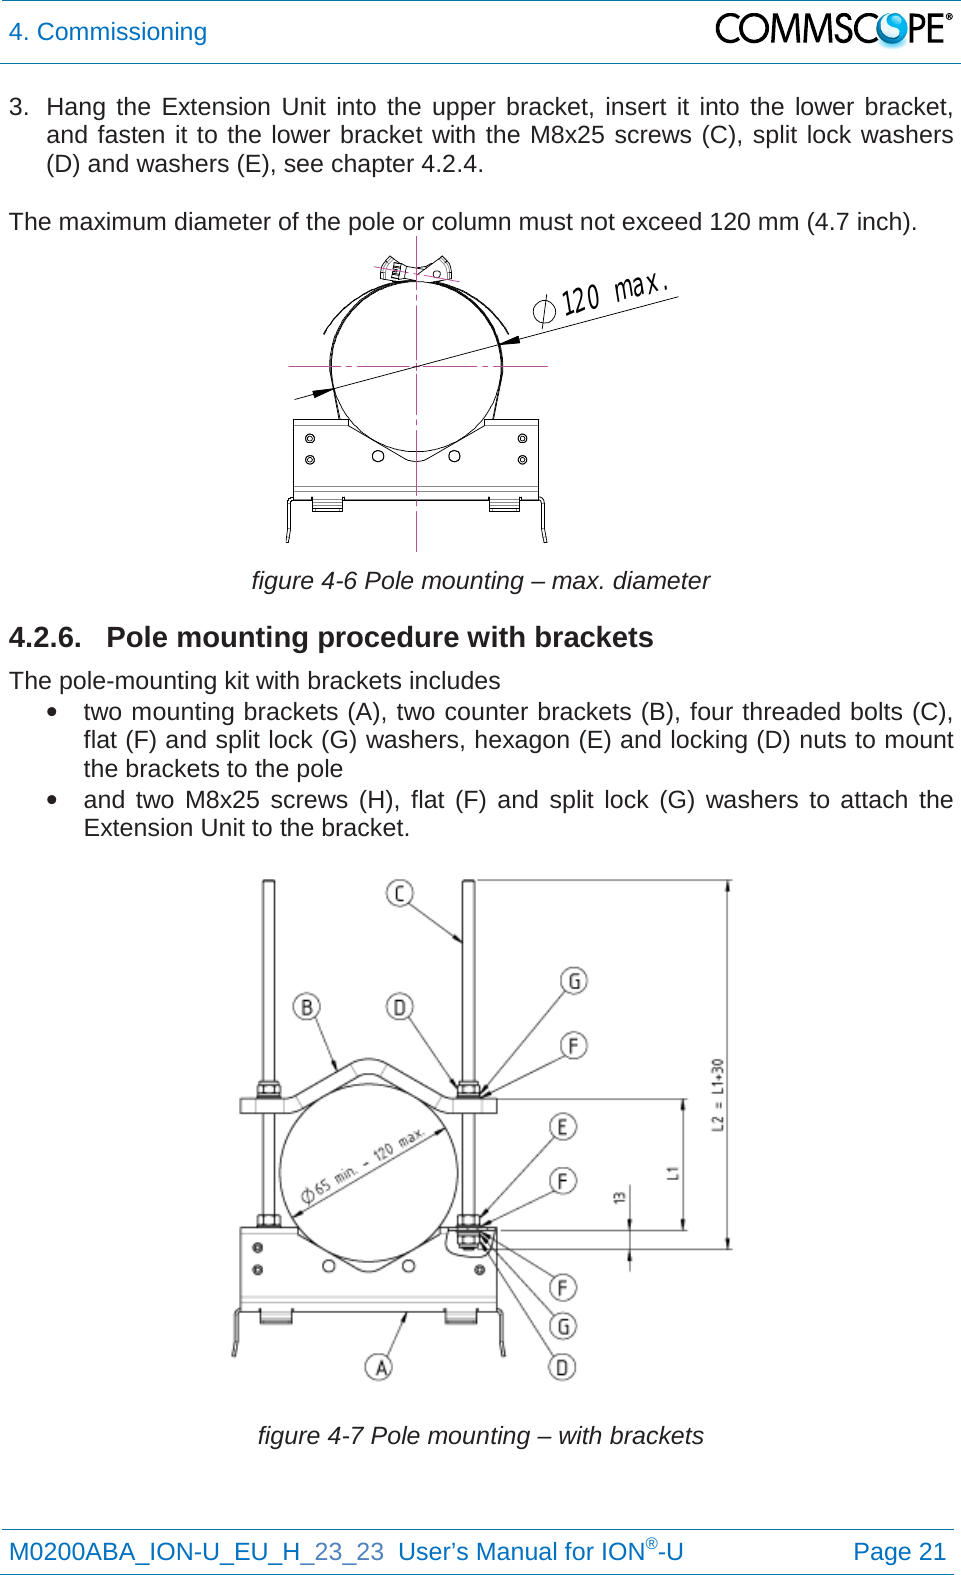 4. Commissioning   M0200ABA_ION-U_EU_H_23_23  User’s Manual for ION®-U  Page 21  3. Hang the Extension  Unit into the upper bracket, insert it into the lower bracket, and fasten it to the lower bracket with the M8x25 screws (C), split lock washers (D) and washers (E), see chapter 4.2.4.  The maximum diameter of the pole or column must not exceed 120 mm (4.7 inch).  figure 4-6 Pole mounting – max. diameter 4.2.6. Pole mounting procedure with brackets The pole-mounting kit with brackets includes • two mounting brackets (A), two counter brackets (B), four threaded bolts (C), flat (F) and split lock (G) washers, hexagon (E) and locking (D) nuts to mount the brackets to the pole • and two M8x25 screws (H), flat (F) and split lock (G) washers to attach the Extension Unit to the bracket.  figure 4-7 Pole mounting – with brackets 120max.